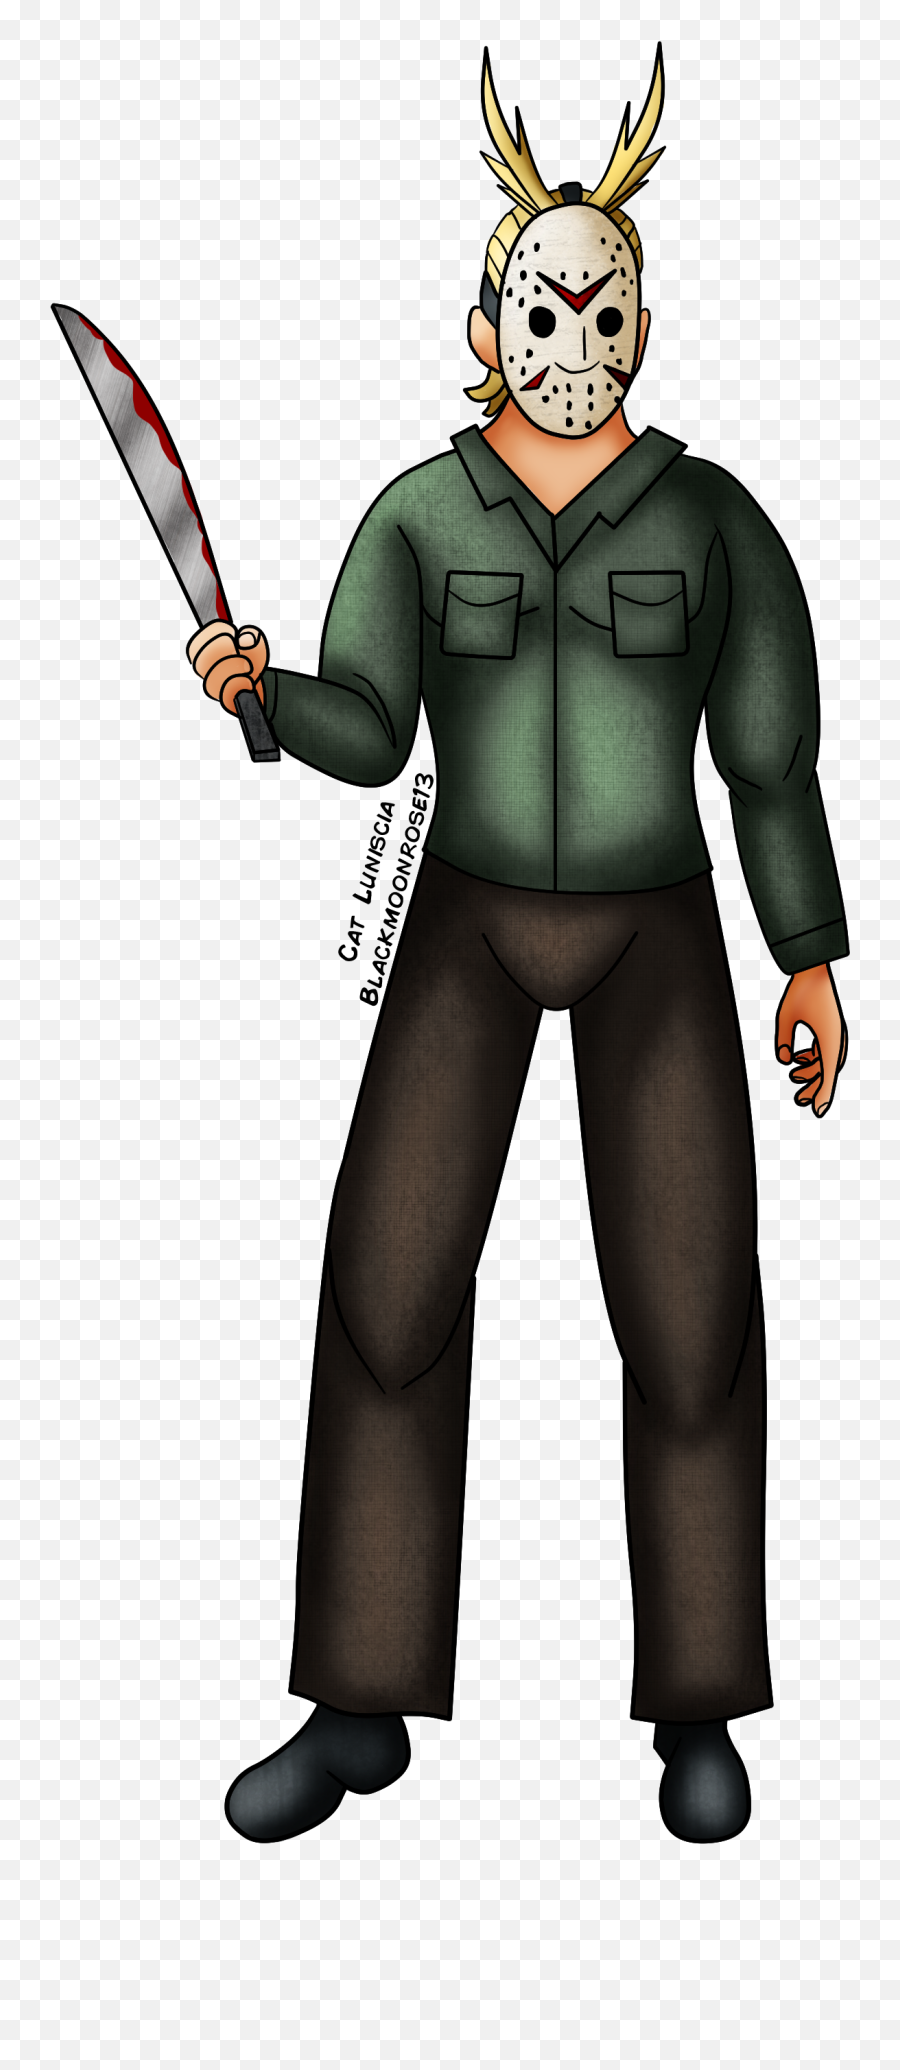 Jason Voorhees All Might By Blackmoonrose13 - Jason Voorhees All Might Png,All Might Png